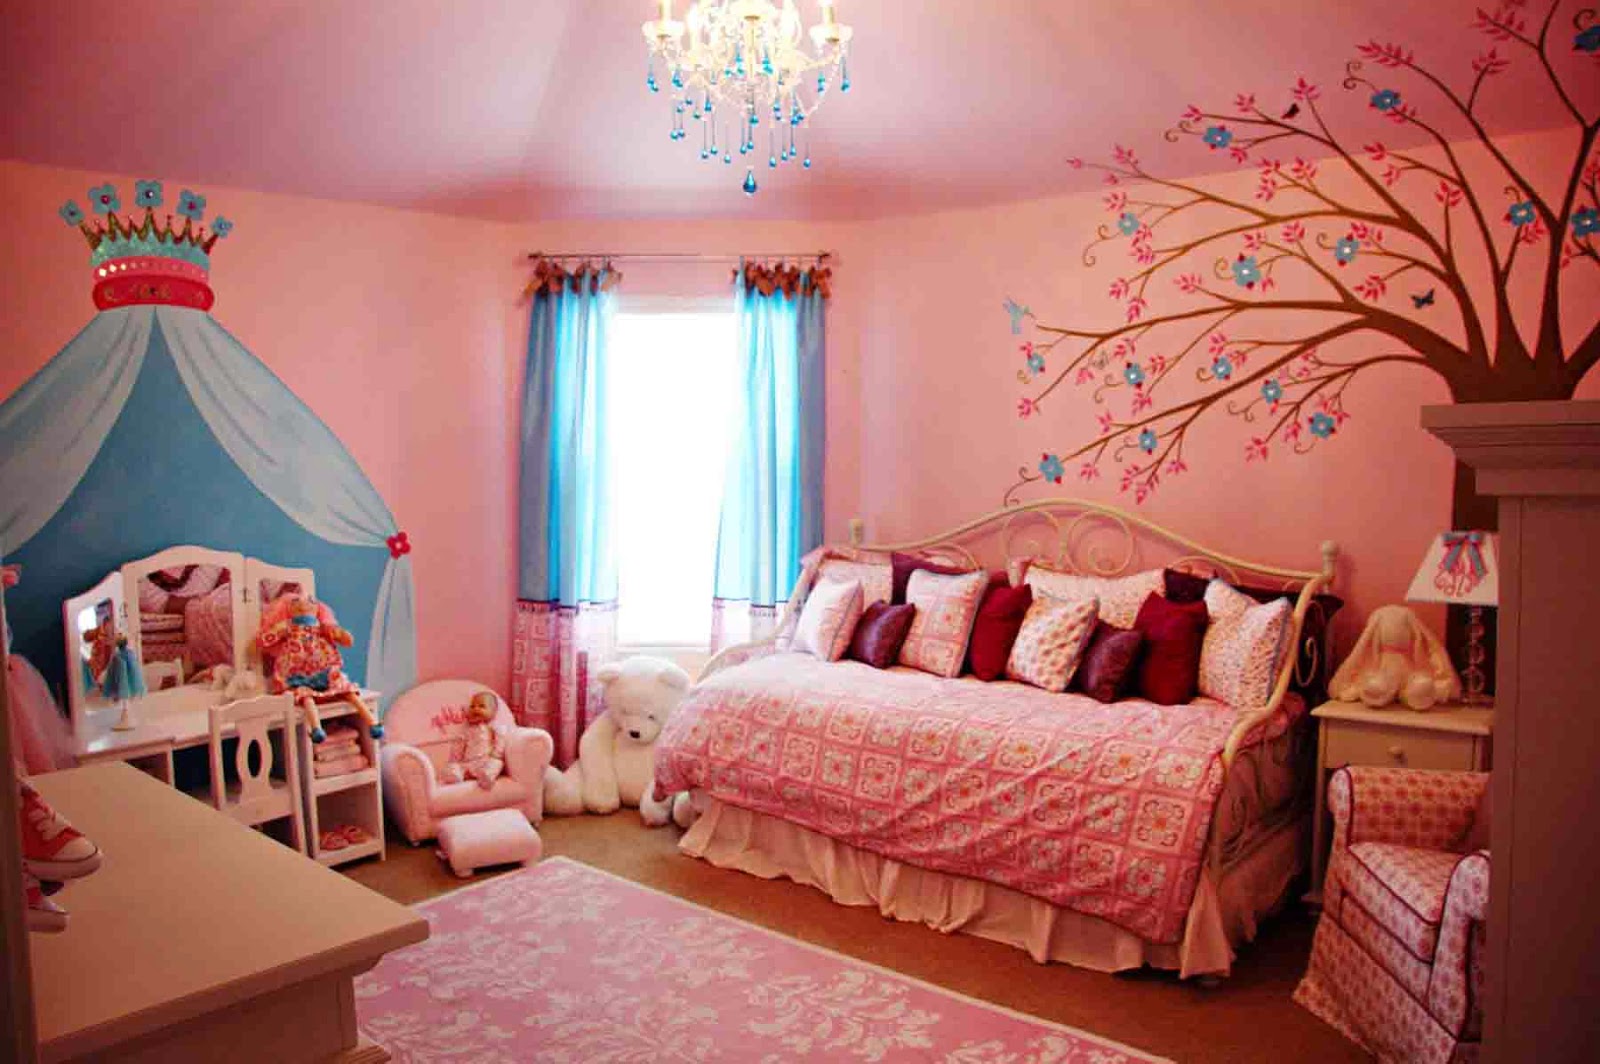 The combination of settings on bedroom designs for girls